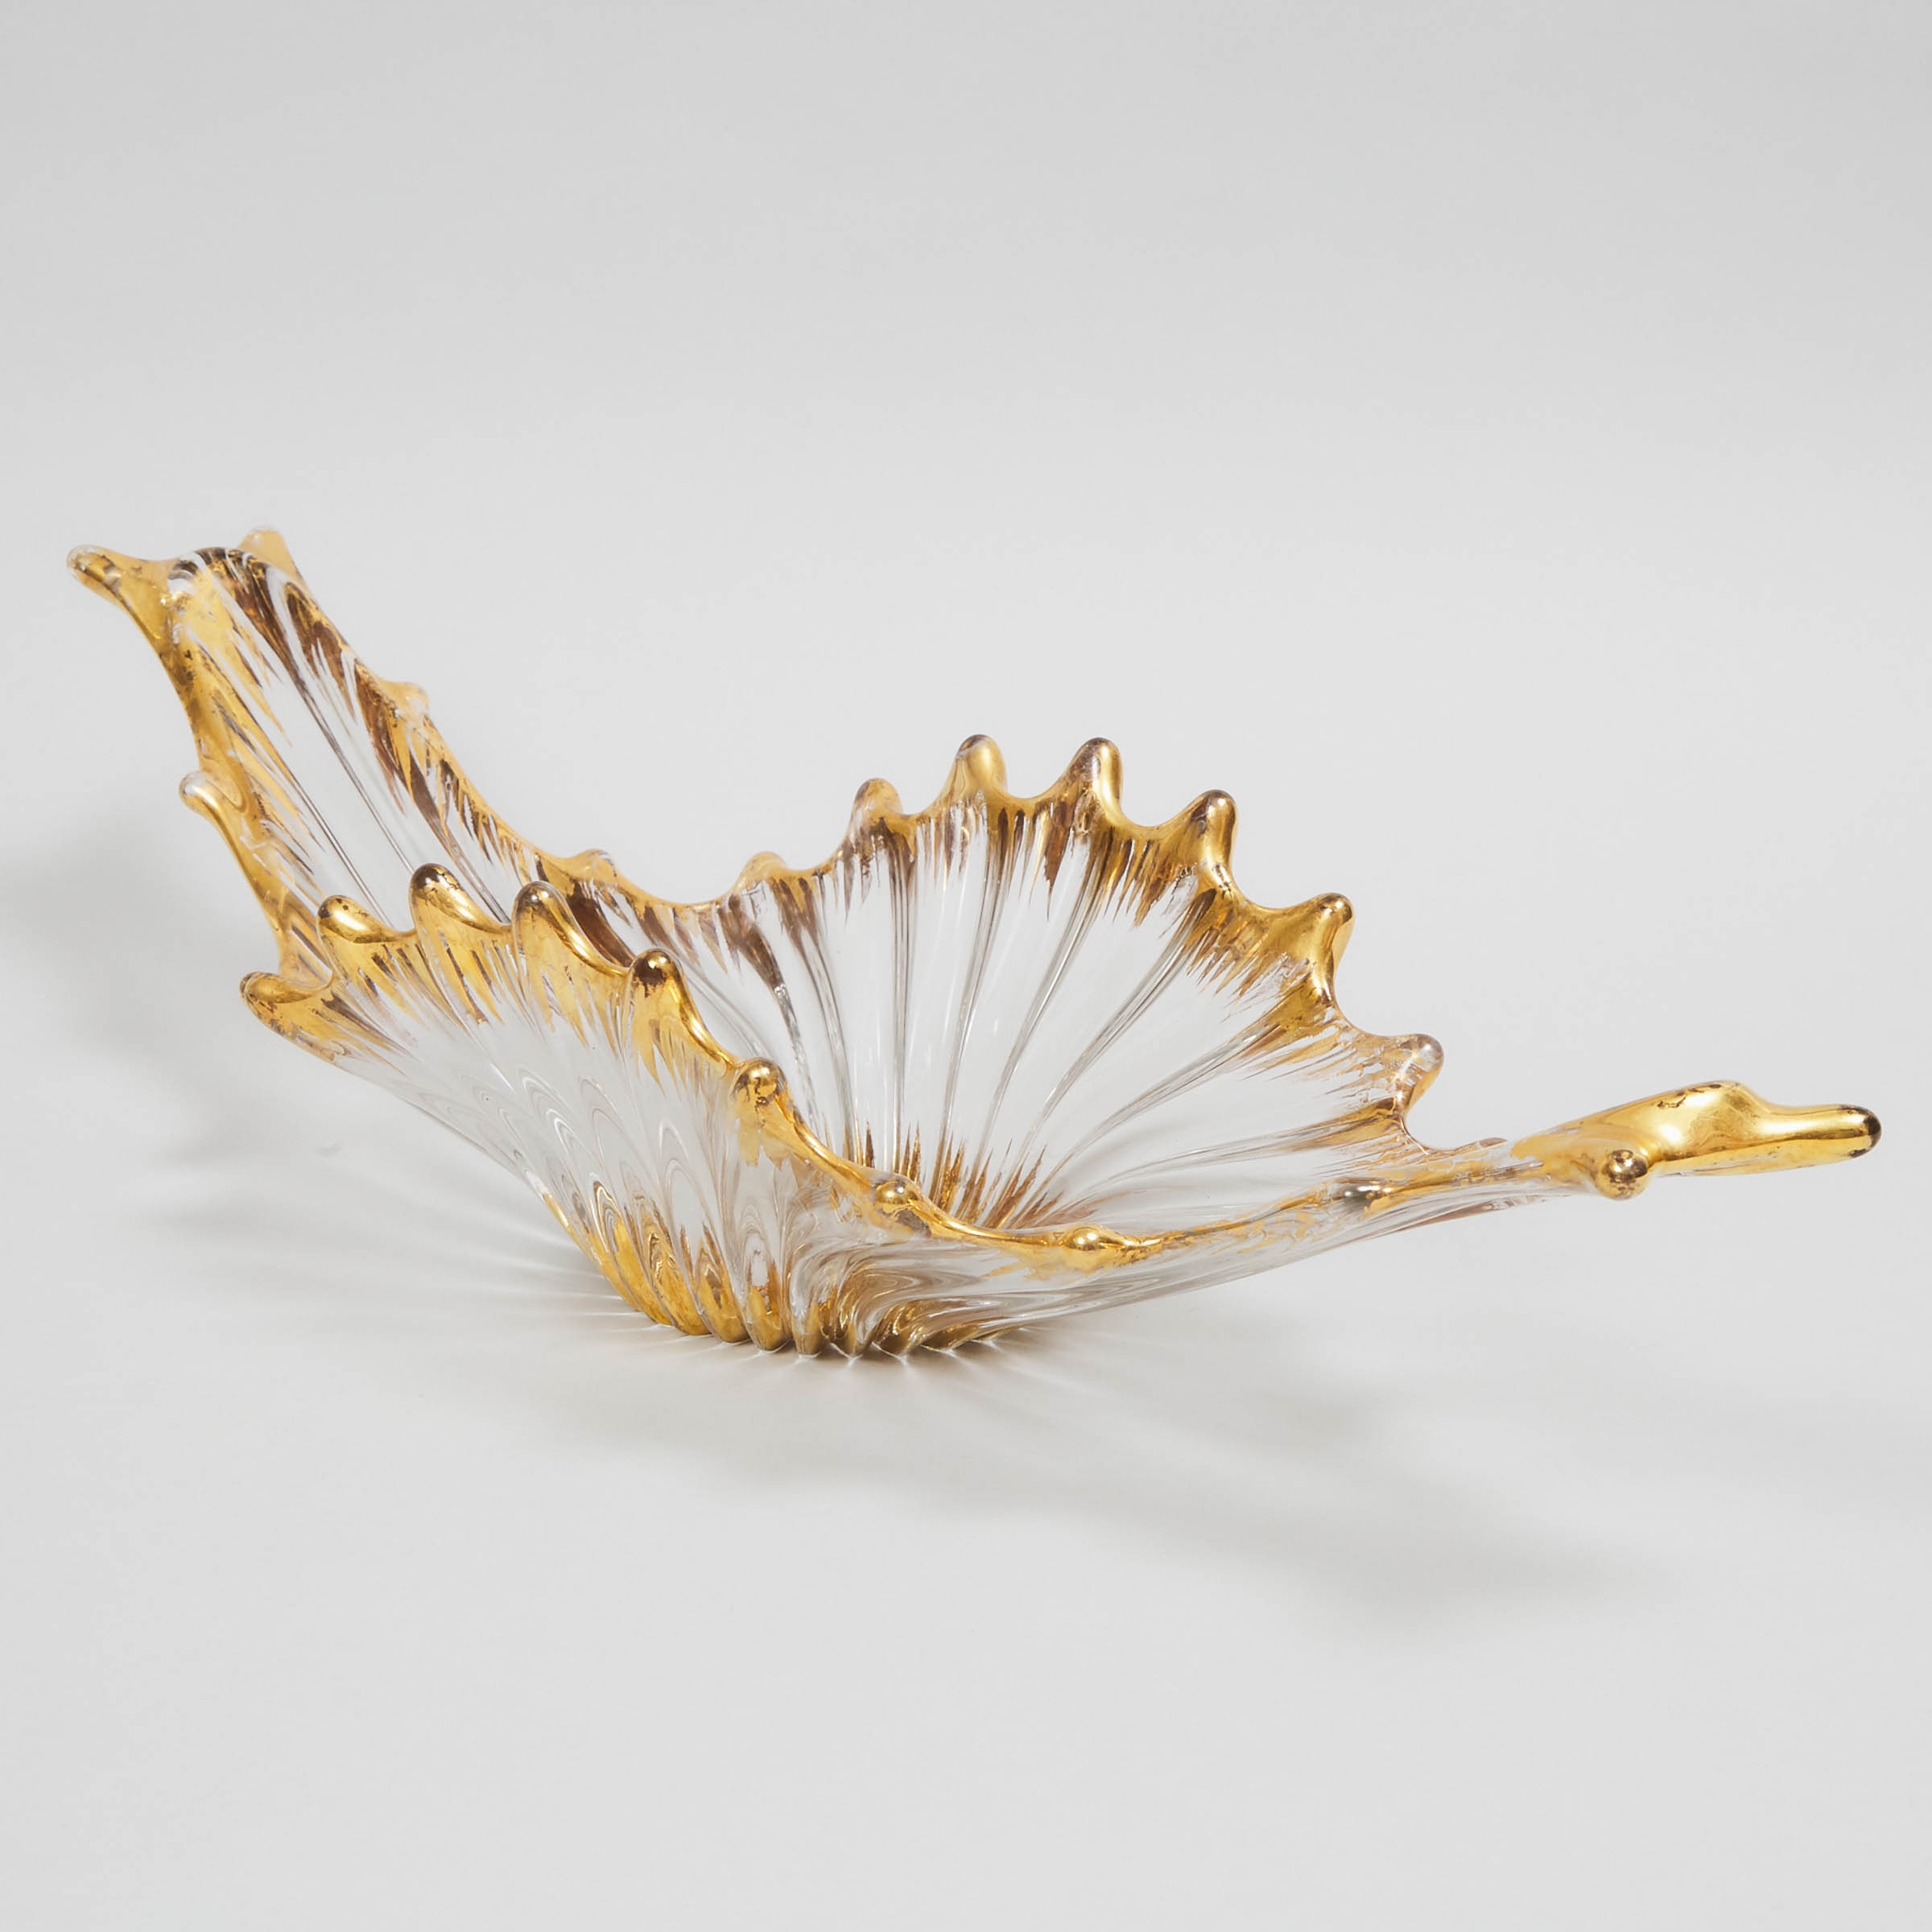 Continental Gilt Glass Centrepiece, possibly Murano, mid-20th century